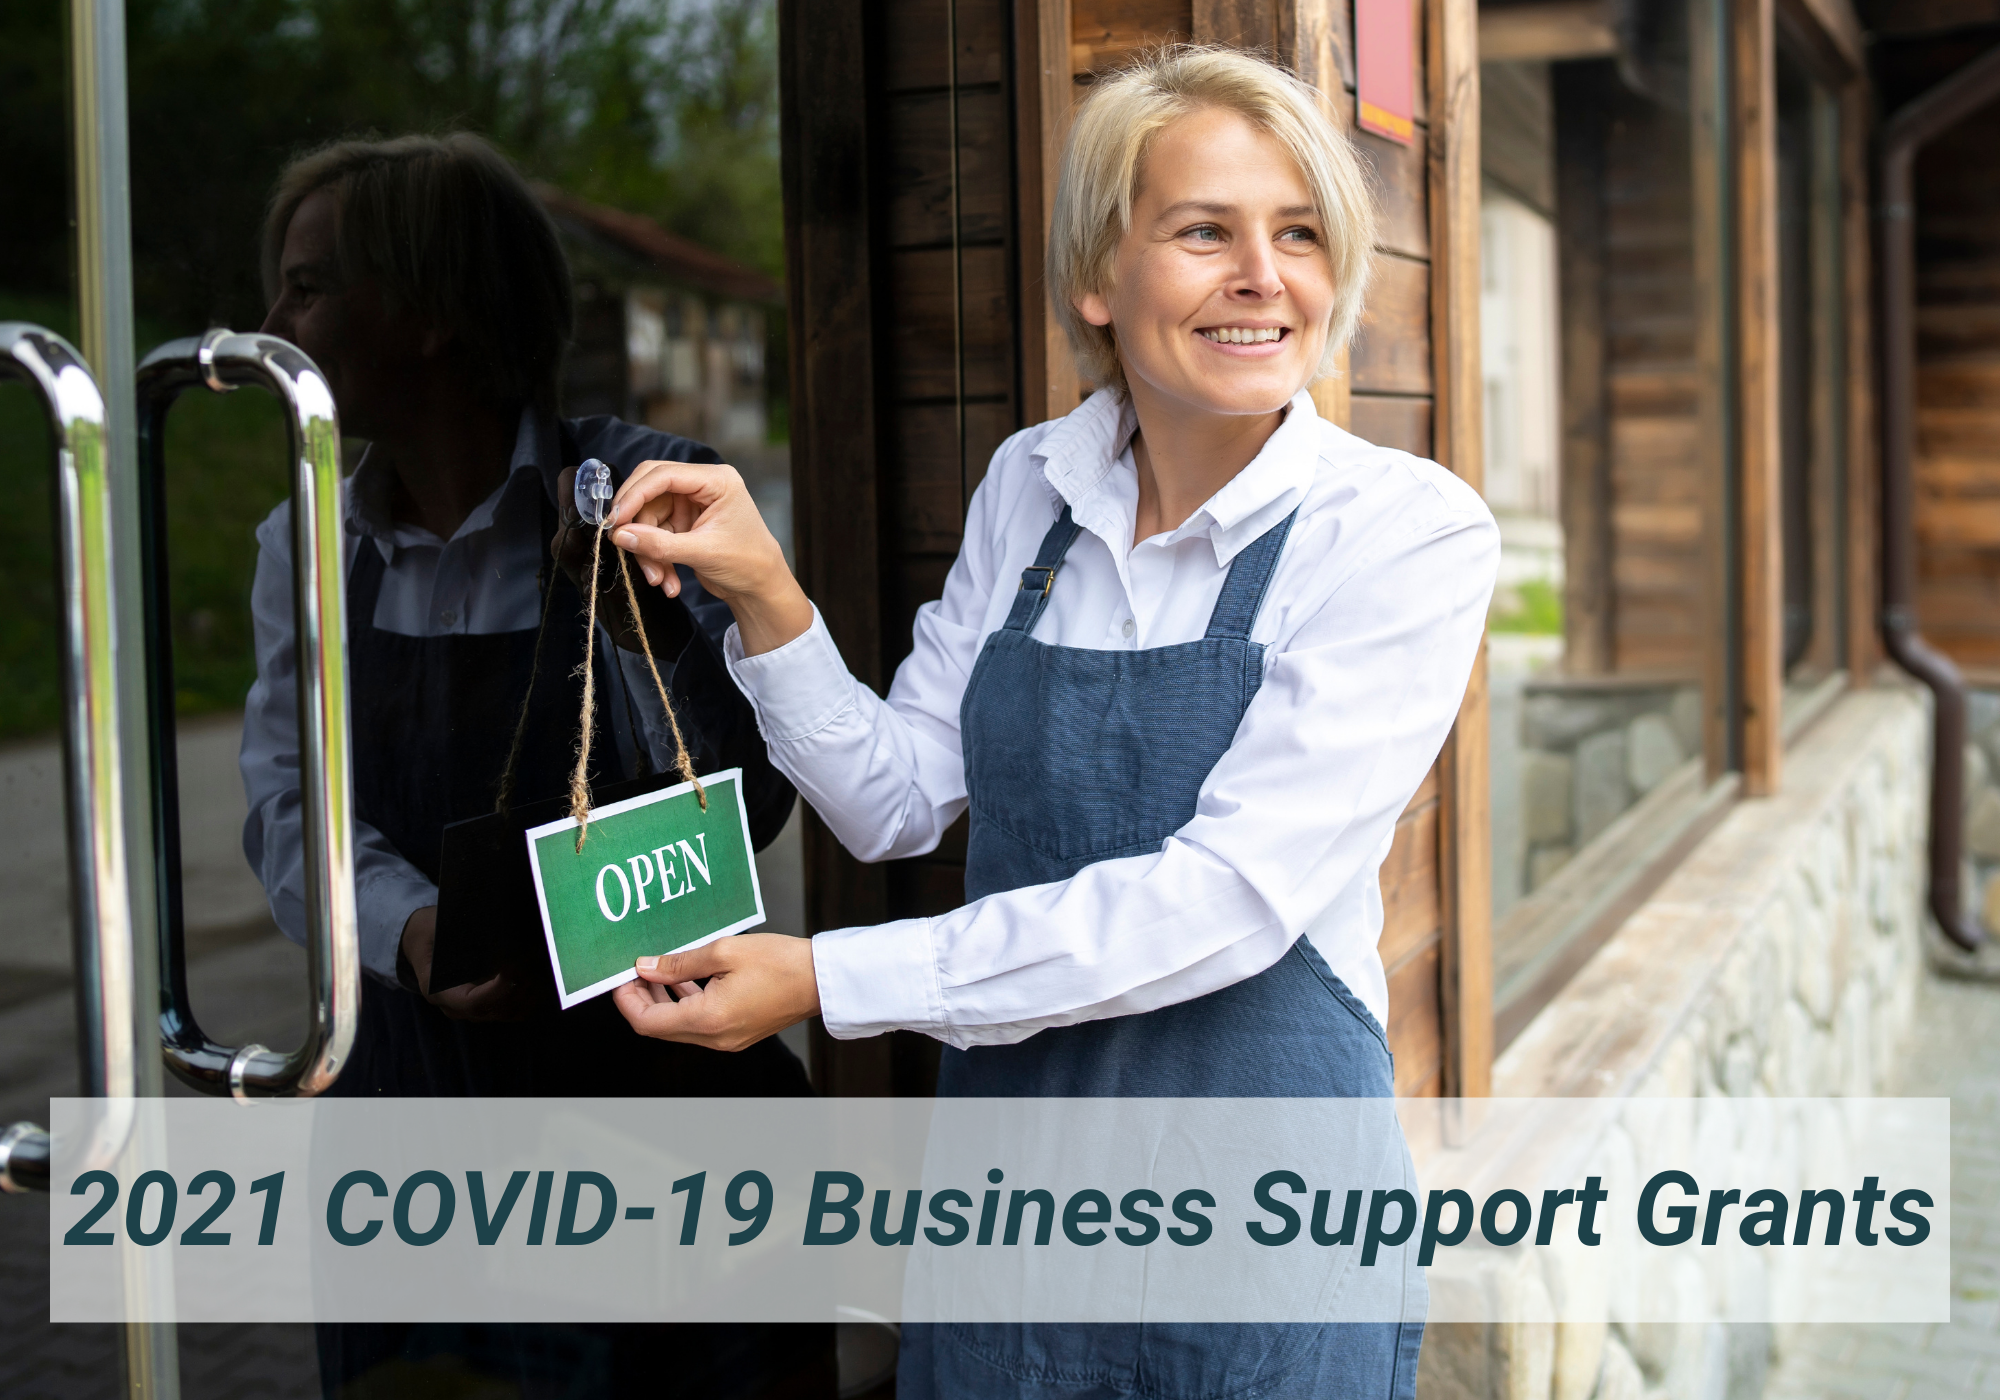 2021 COVID-19 Business Support Grants for Lockdown-Impacted Businesses in Queensland